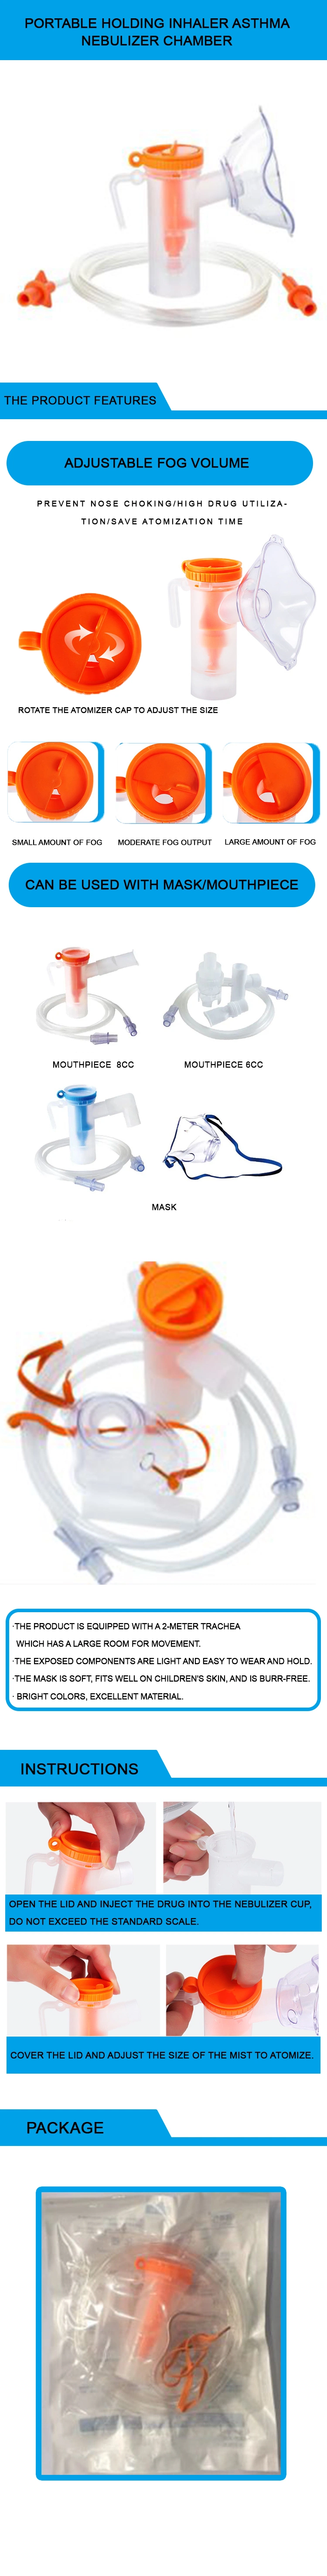 CE/ISO Approved Asthma Inhaler Inhalation Chamber Aerosol Spacer with Adult and Child Masks